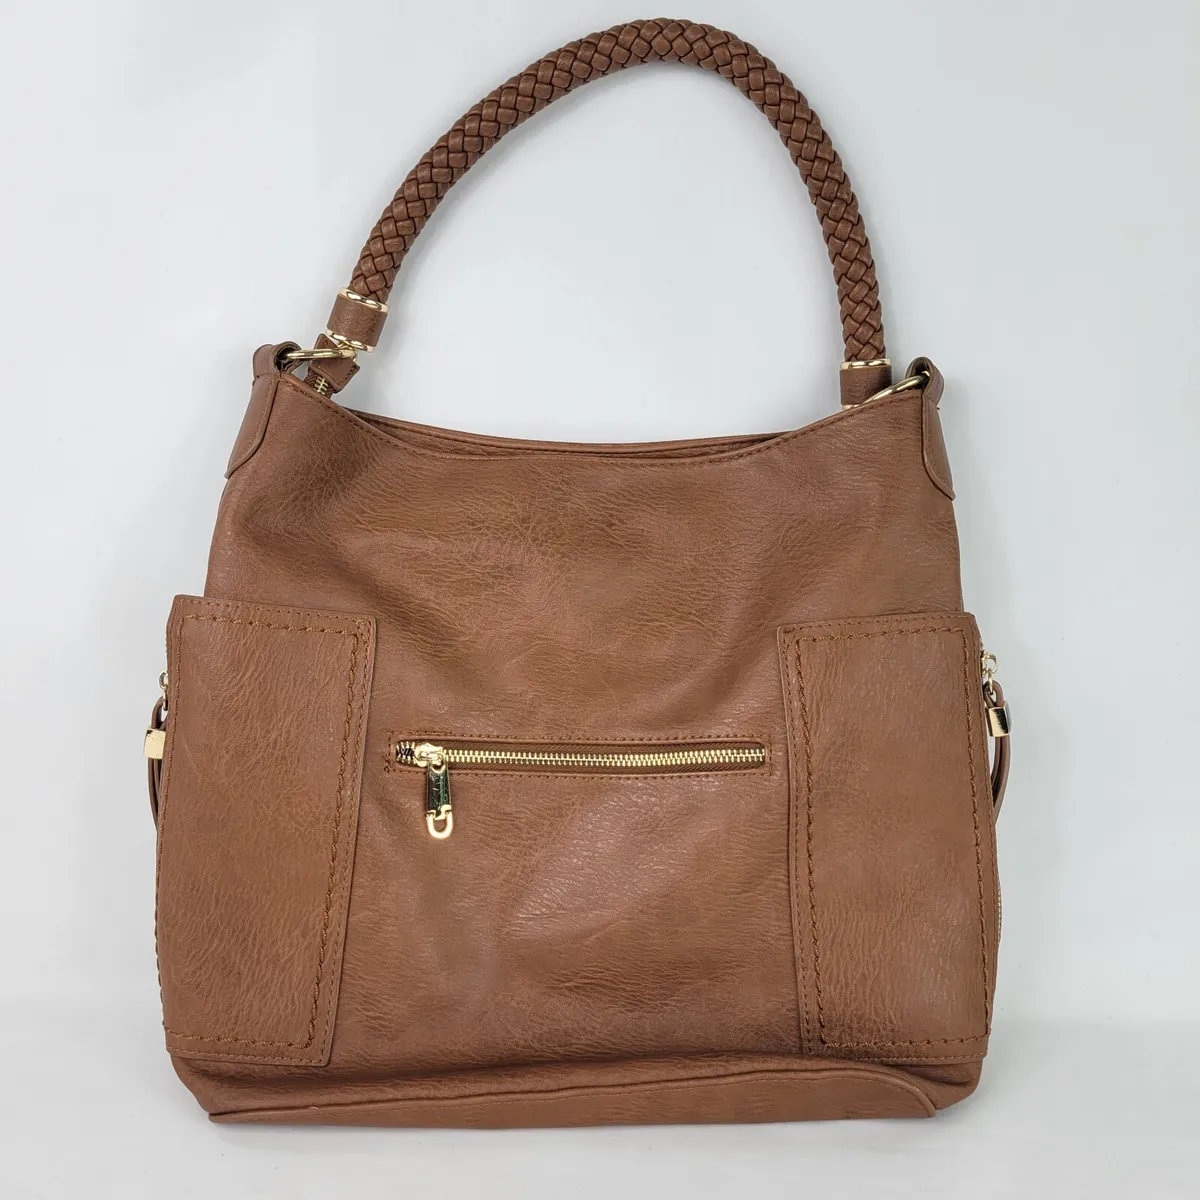 Miztique The Grace Hobo Purse with Braided Handle in Brown Vegan Leather Bag